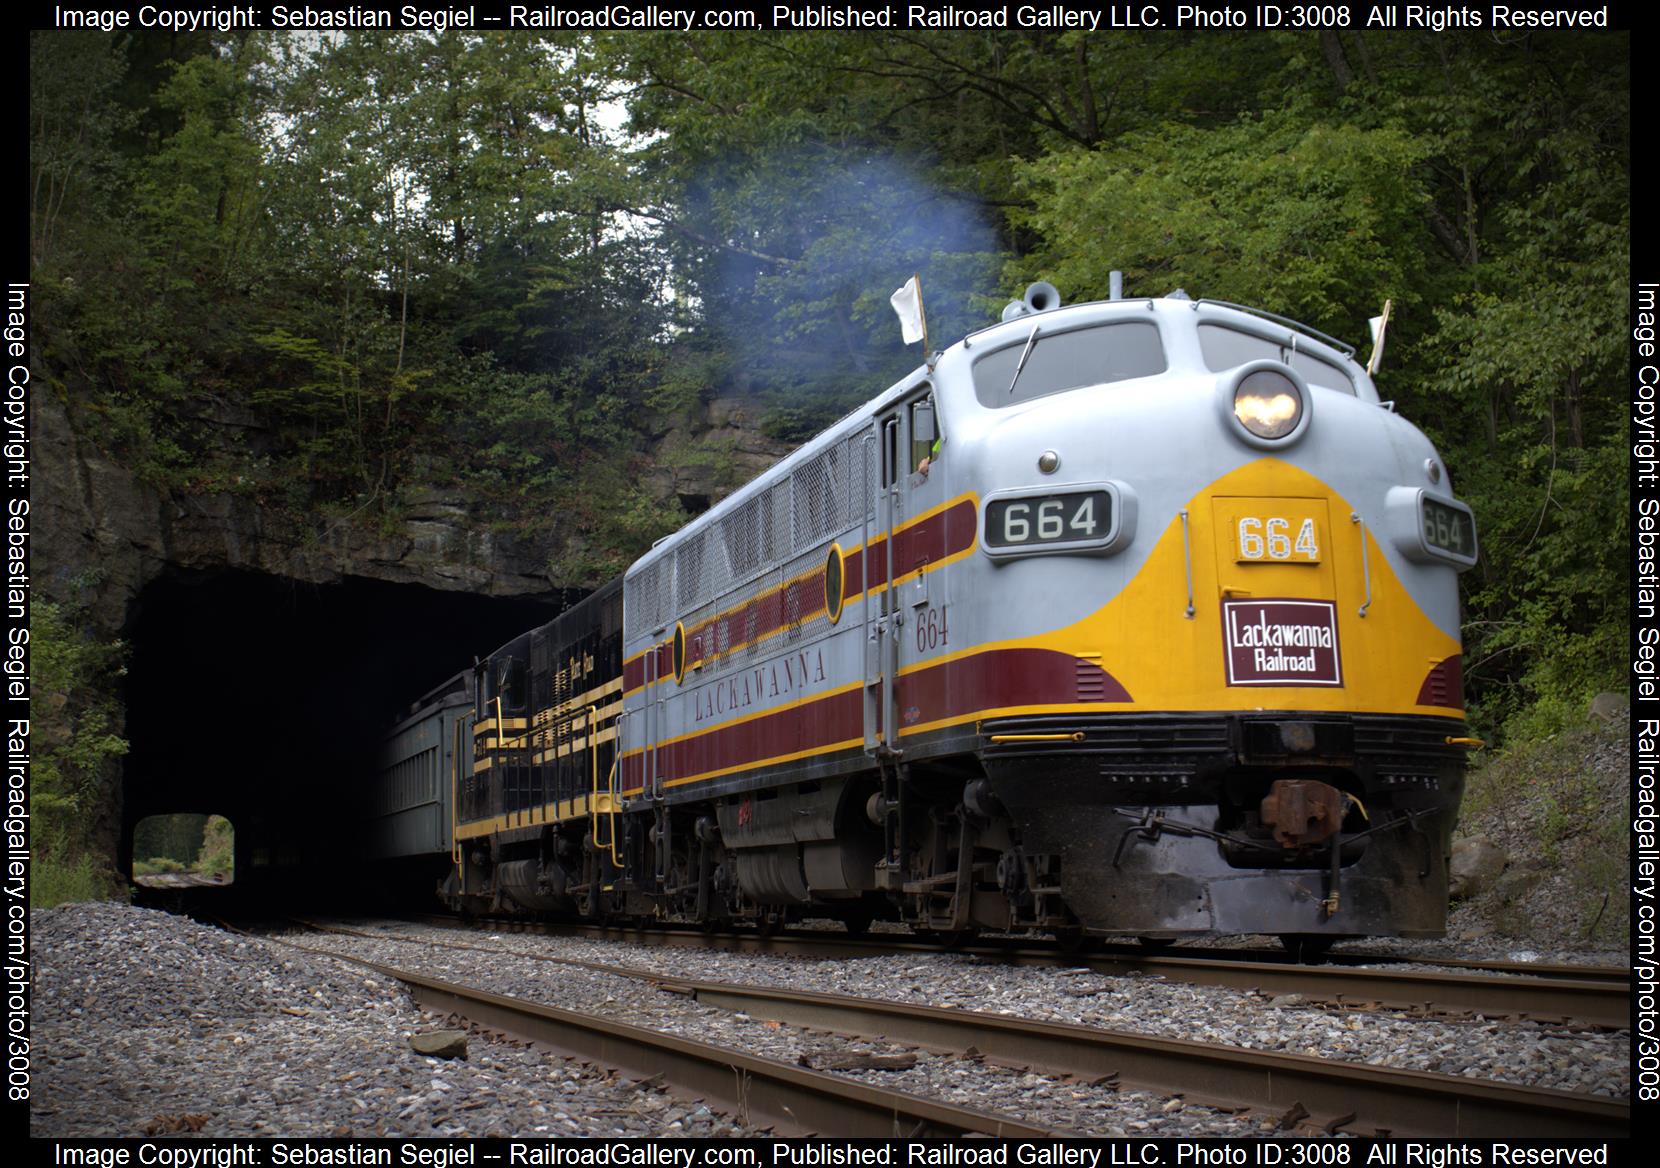 664 is a class F3 and  is pictured in Scranton, Pennsylvania, United States.  This was taken along the Pocono Mainline on the Lackawanna Railroad. Photo Copyright: Sebastian Segiel uploaded to Railroad Gallery on 01/22/2024. This photograph of 664 was taken on Sunday, August 27, 2023. All Rights Reserved. 